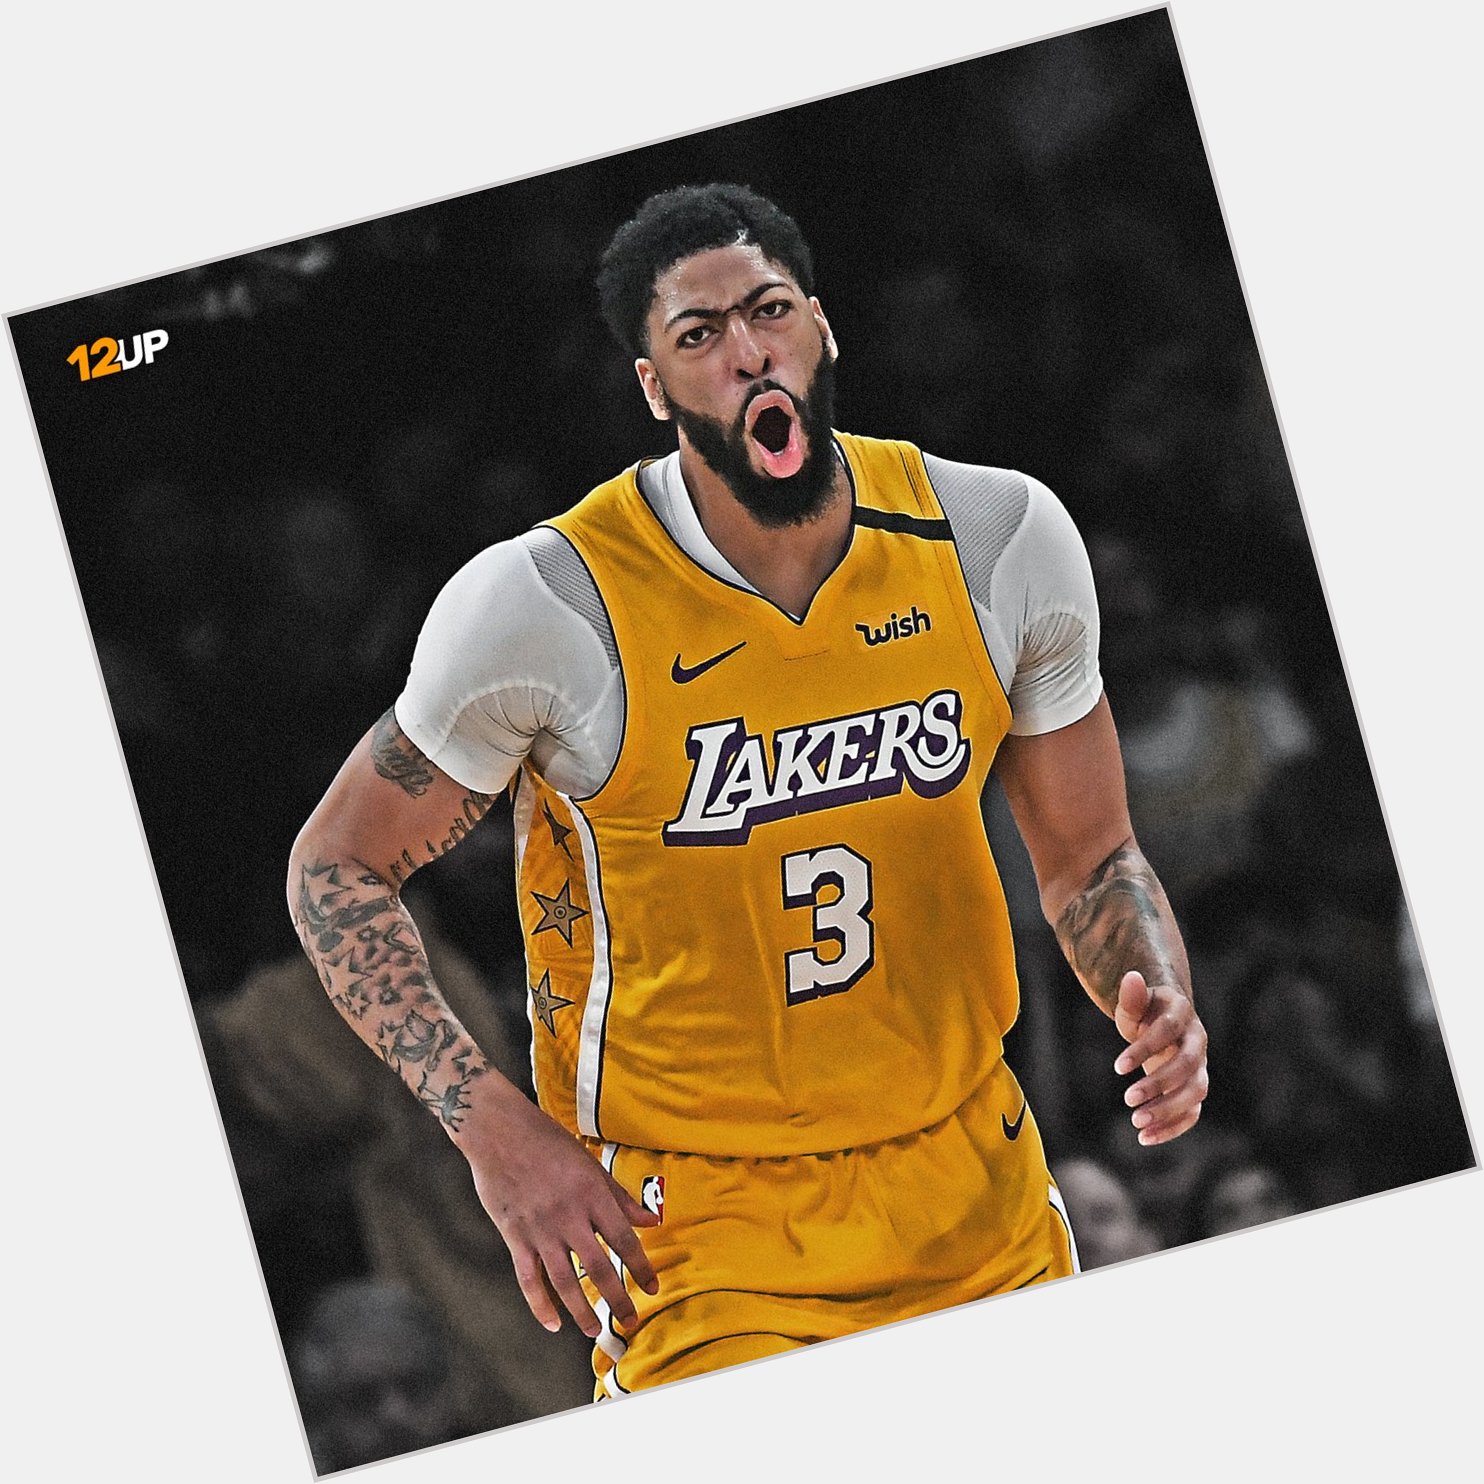 Happy Birthday, Anthony Davis! The Lakers superstar turns wait, he\s only 27?! 

Has he even hit his prime yet?! 